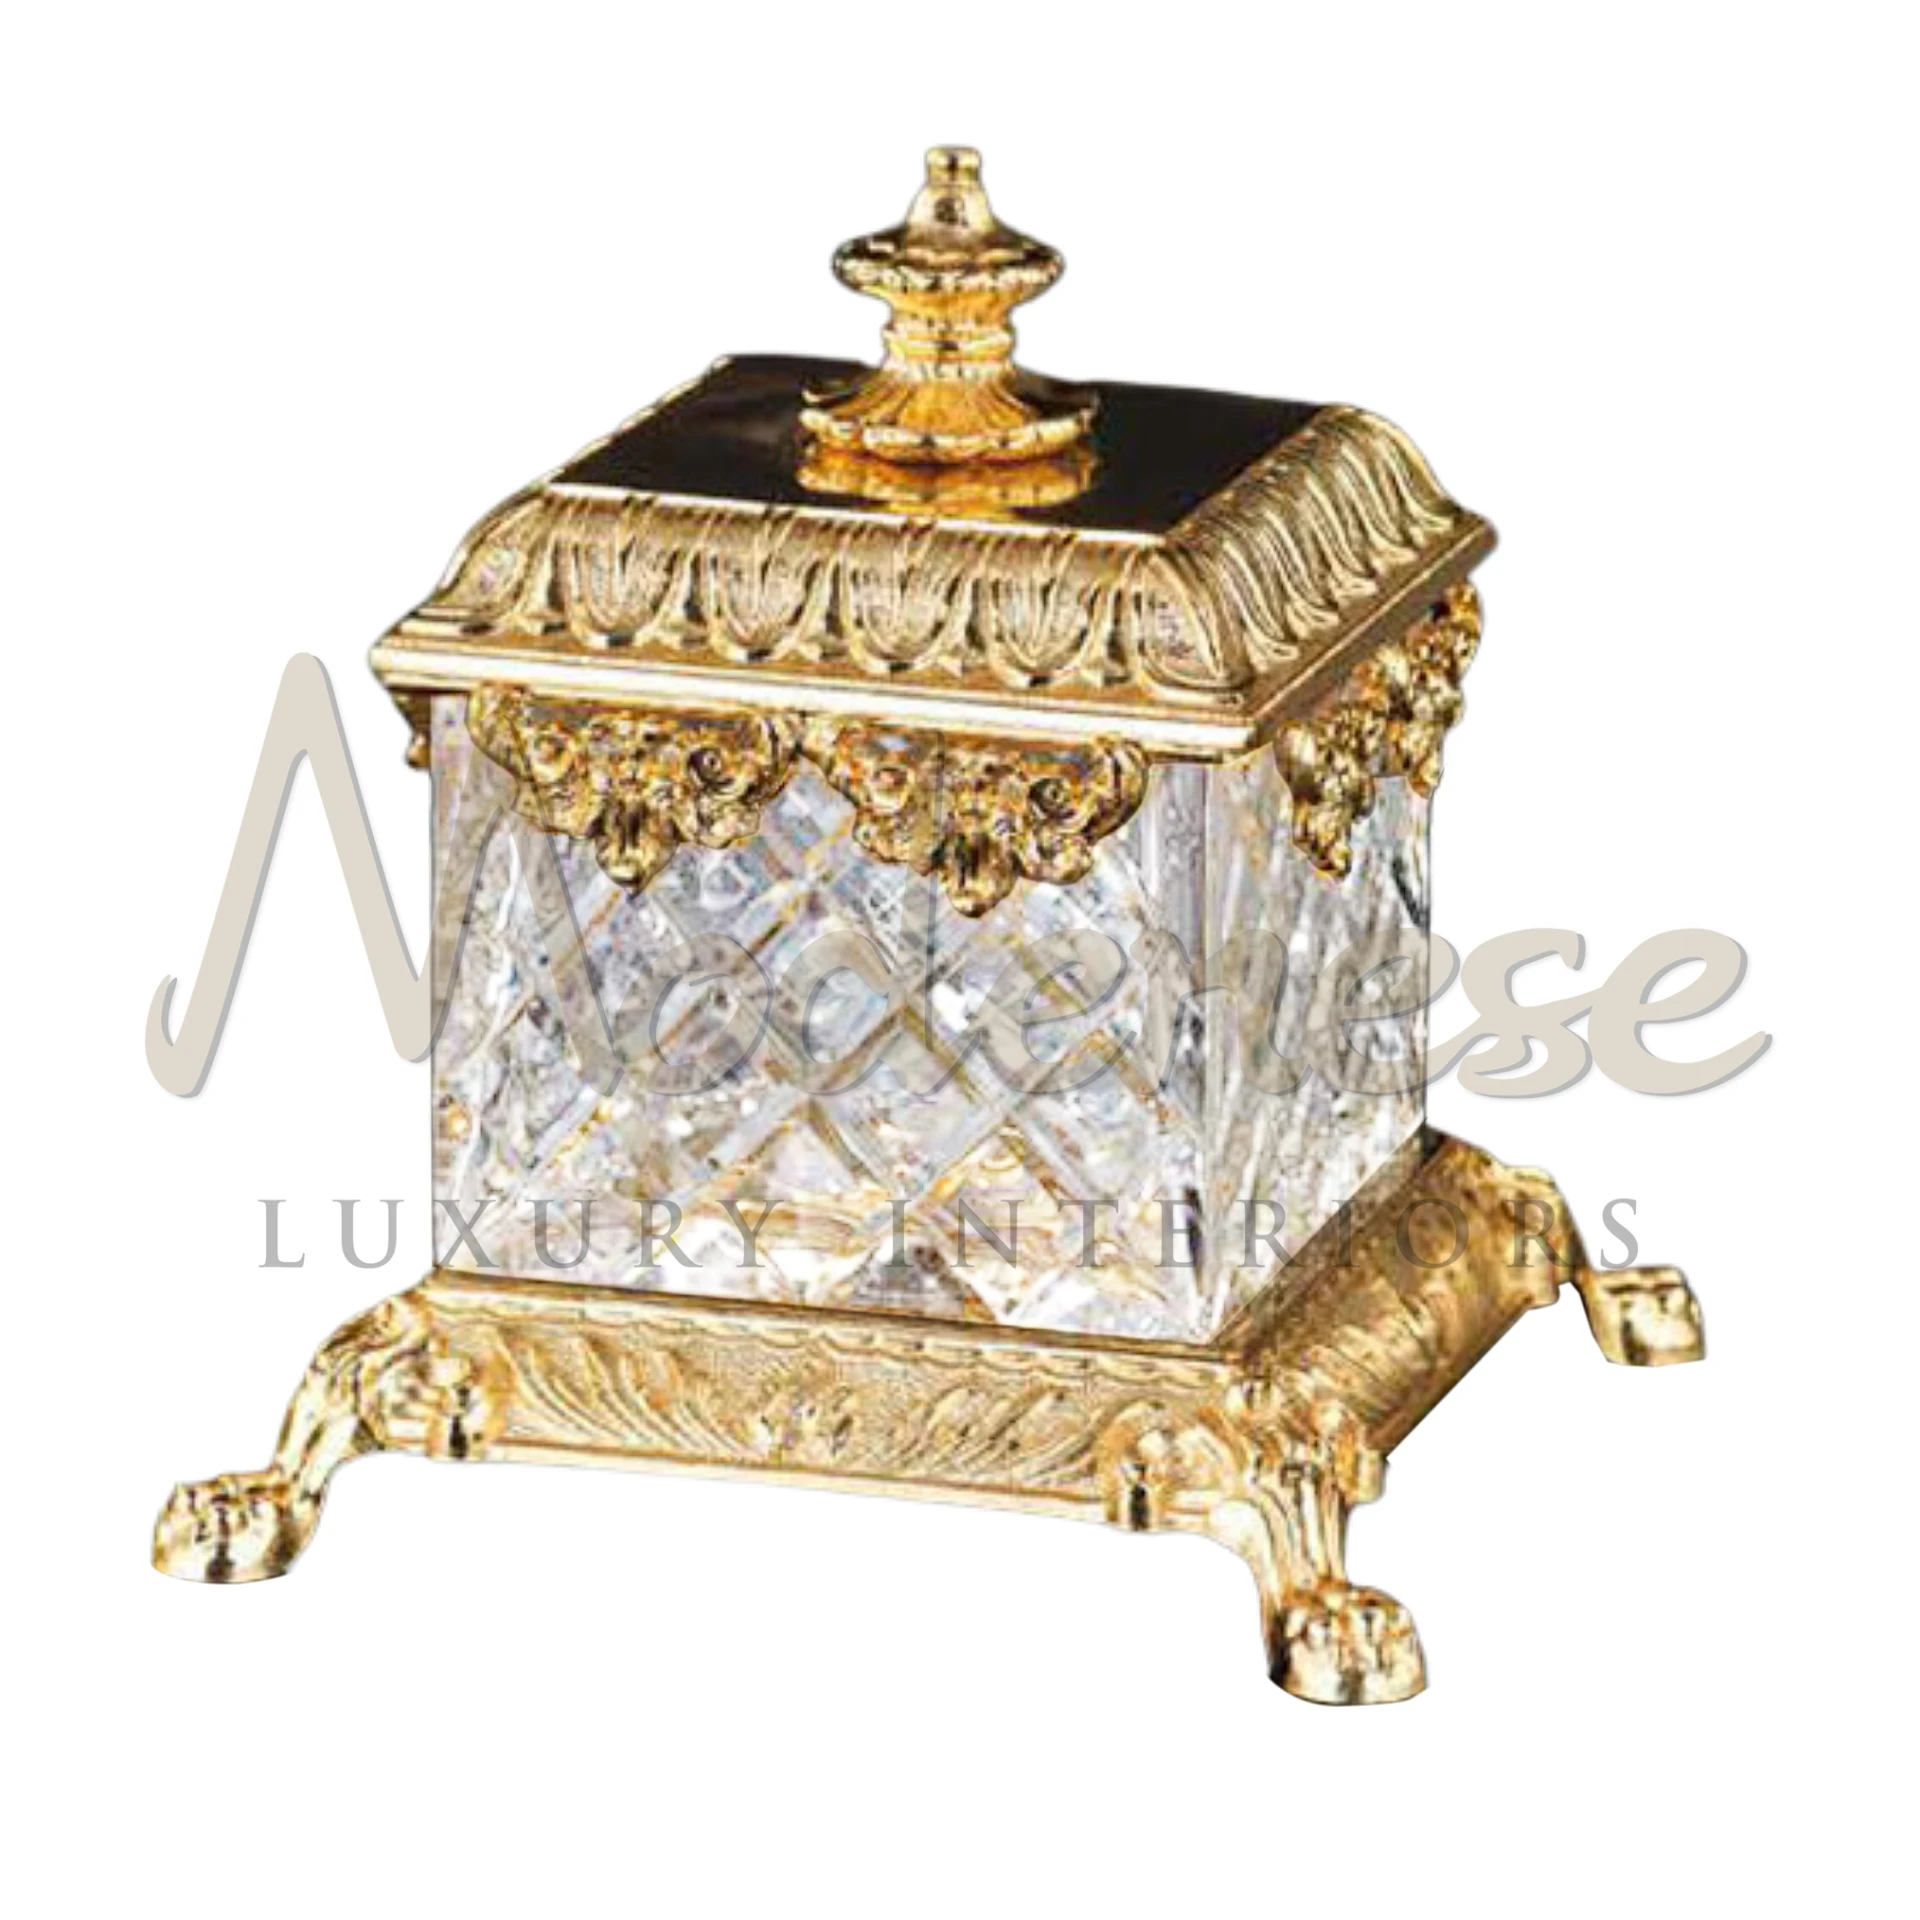 Elegant Gorgeous Glass Box, perfect for storing jewelry or keepsakes, combining high-quality materials with sophisticated design.